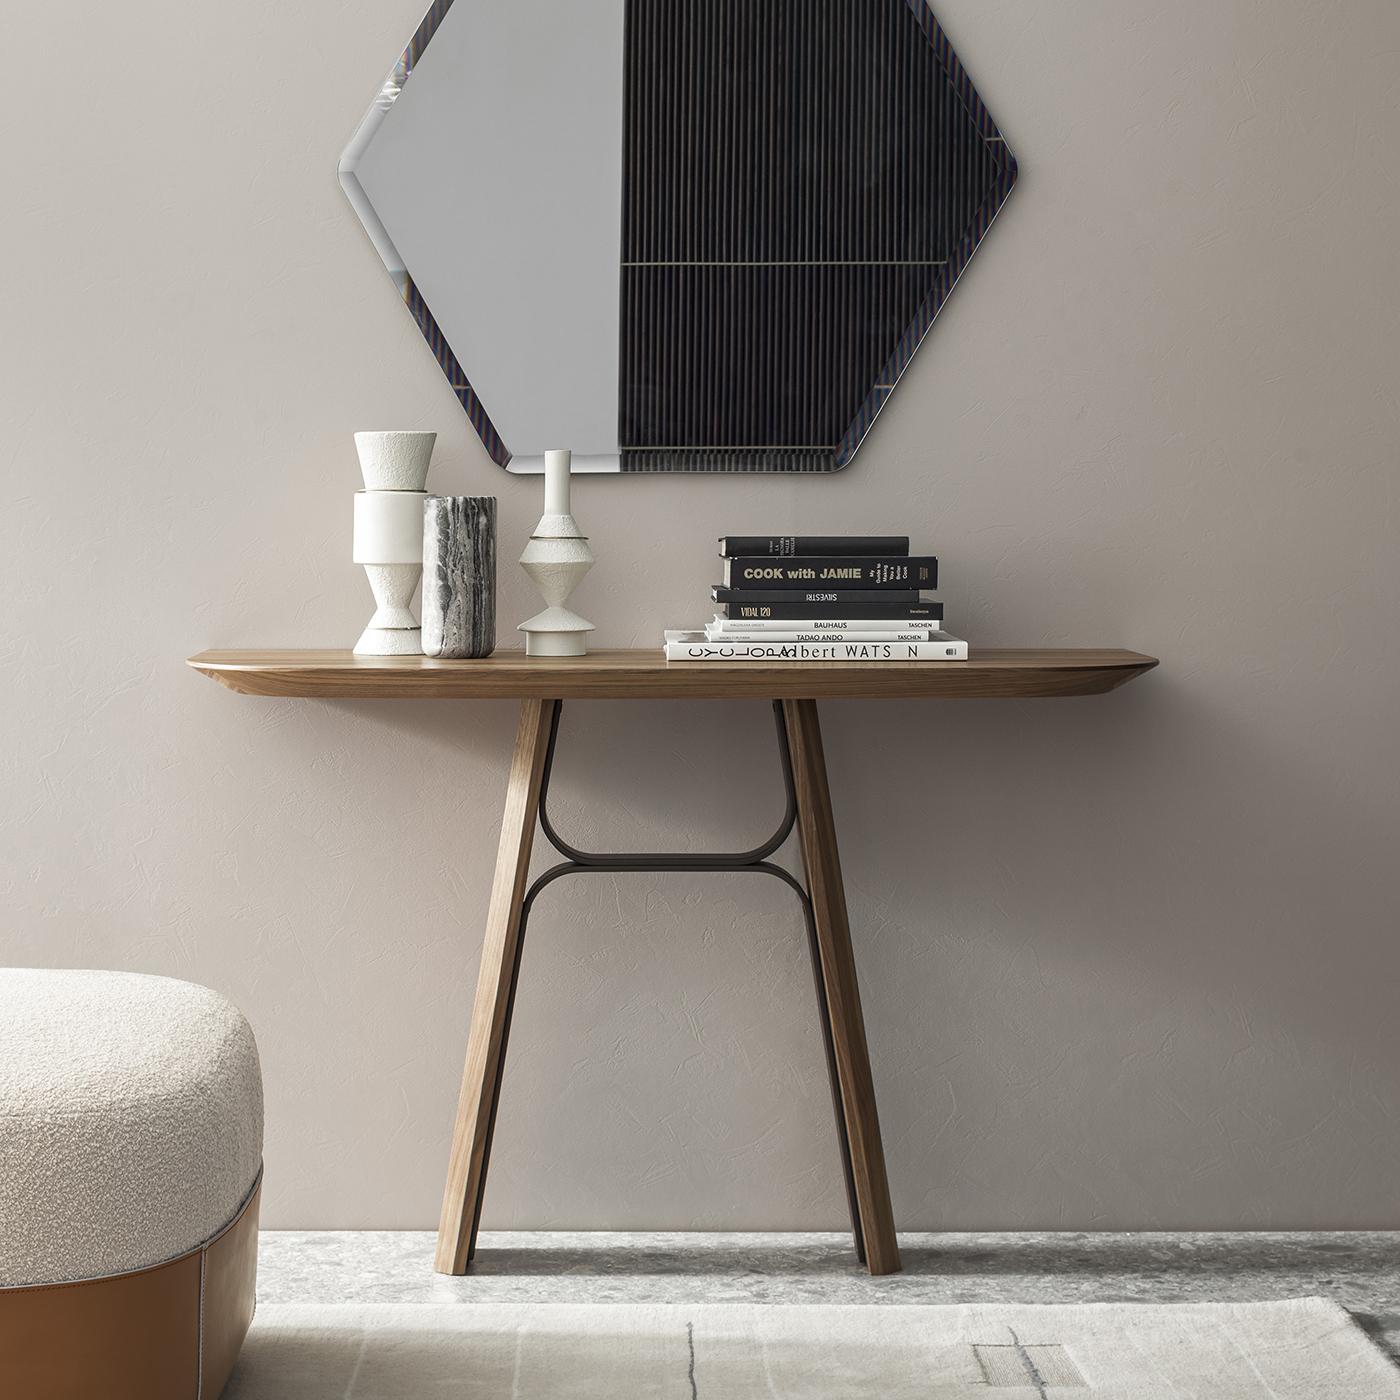 Dynamic and harmonious in its silhouette inspired by fluid-lined bridges, this console was designed and crafted with painstaking attention to detail borrowed from haute couture. Curved metal beams reinforce the slanted legs, which share with the